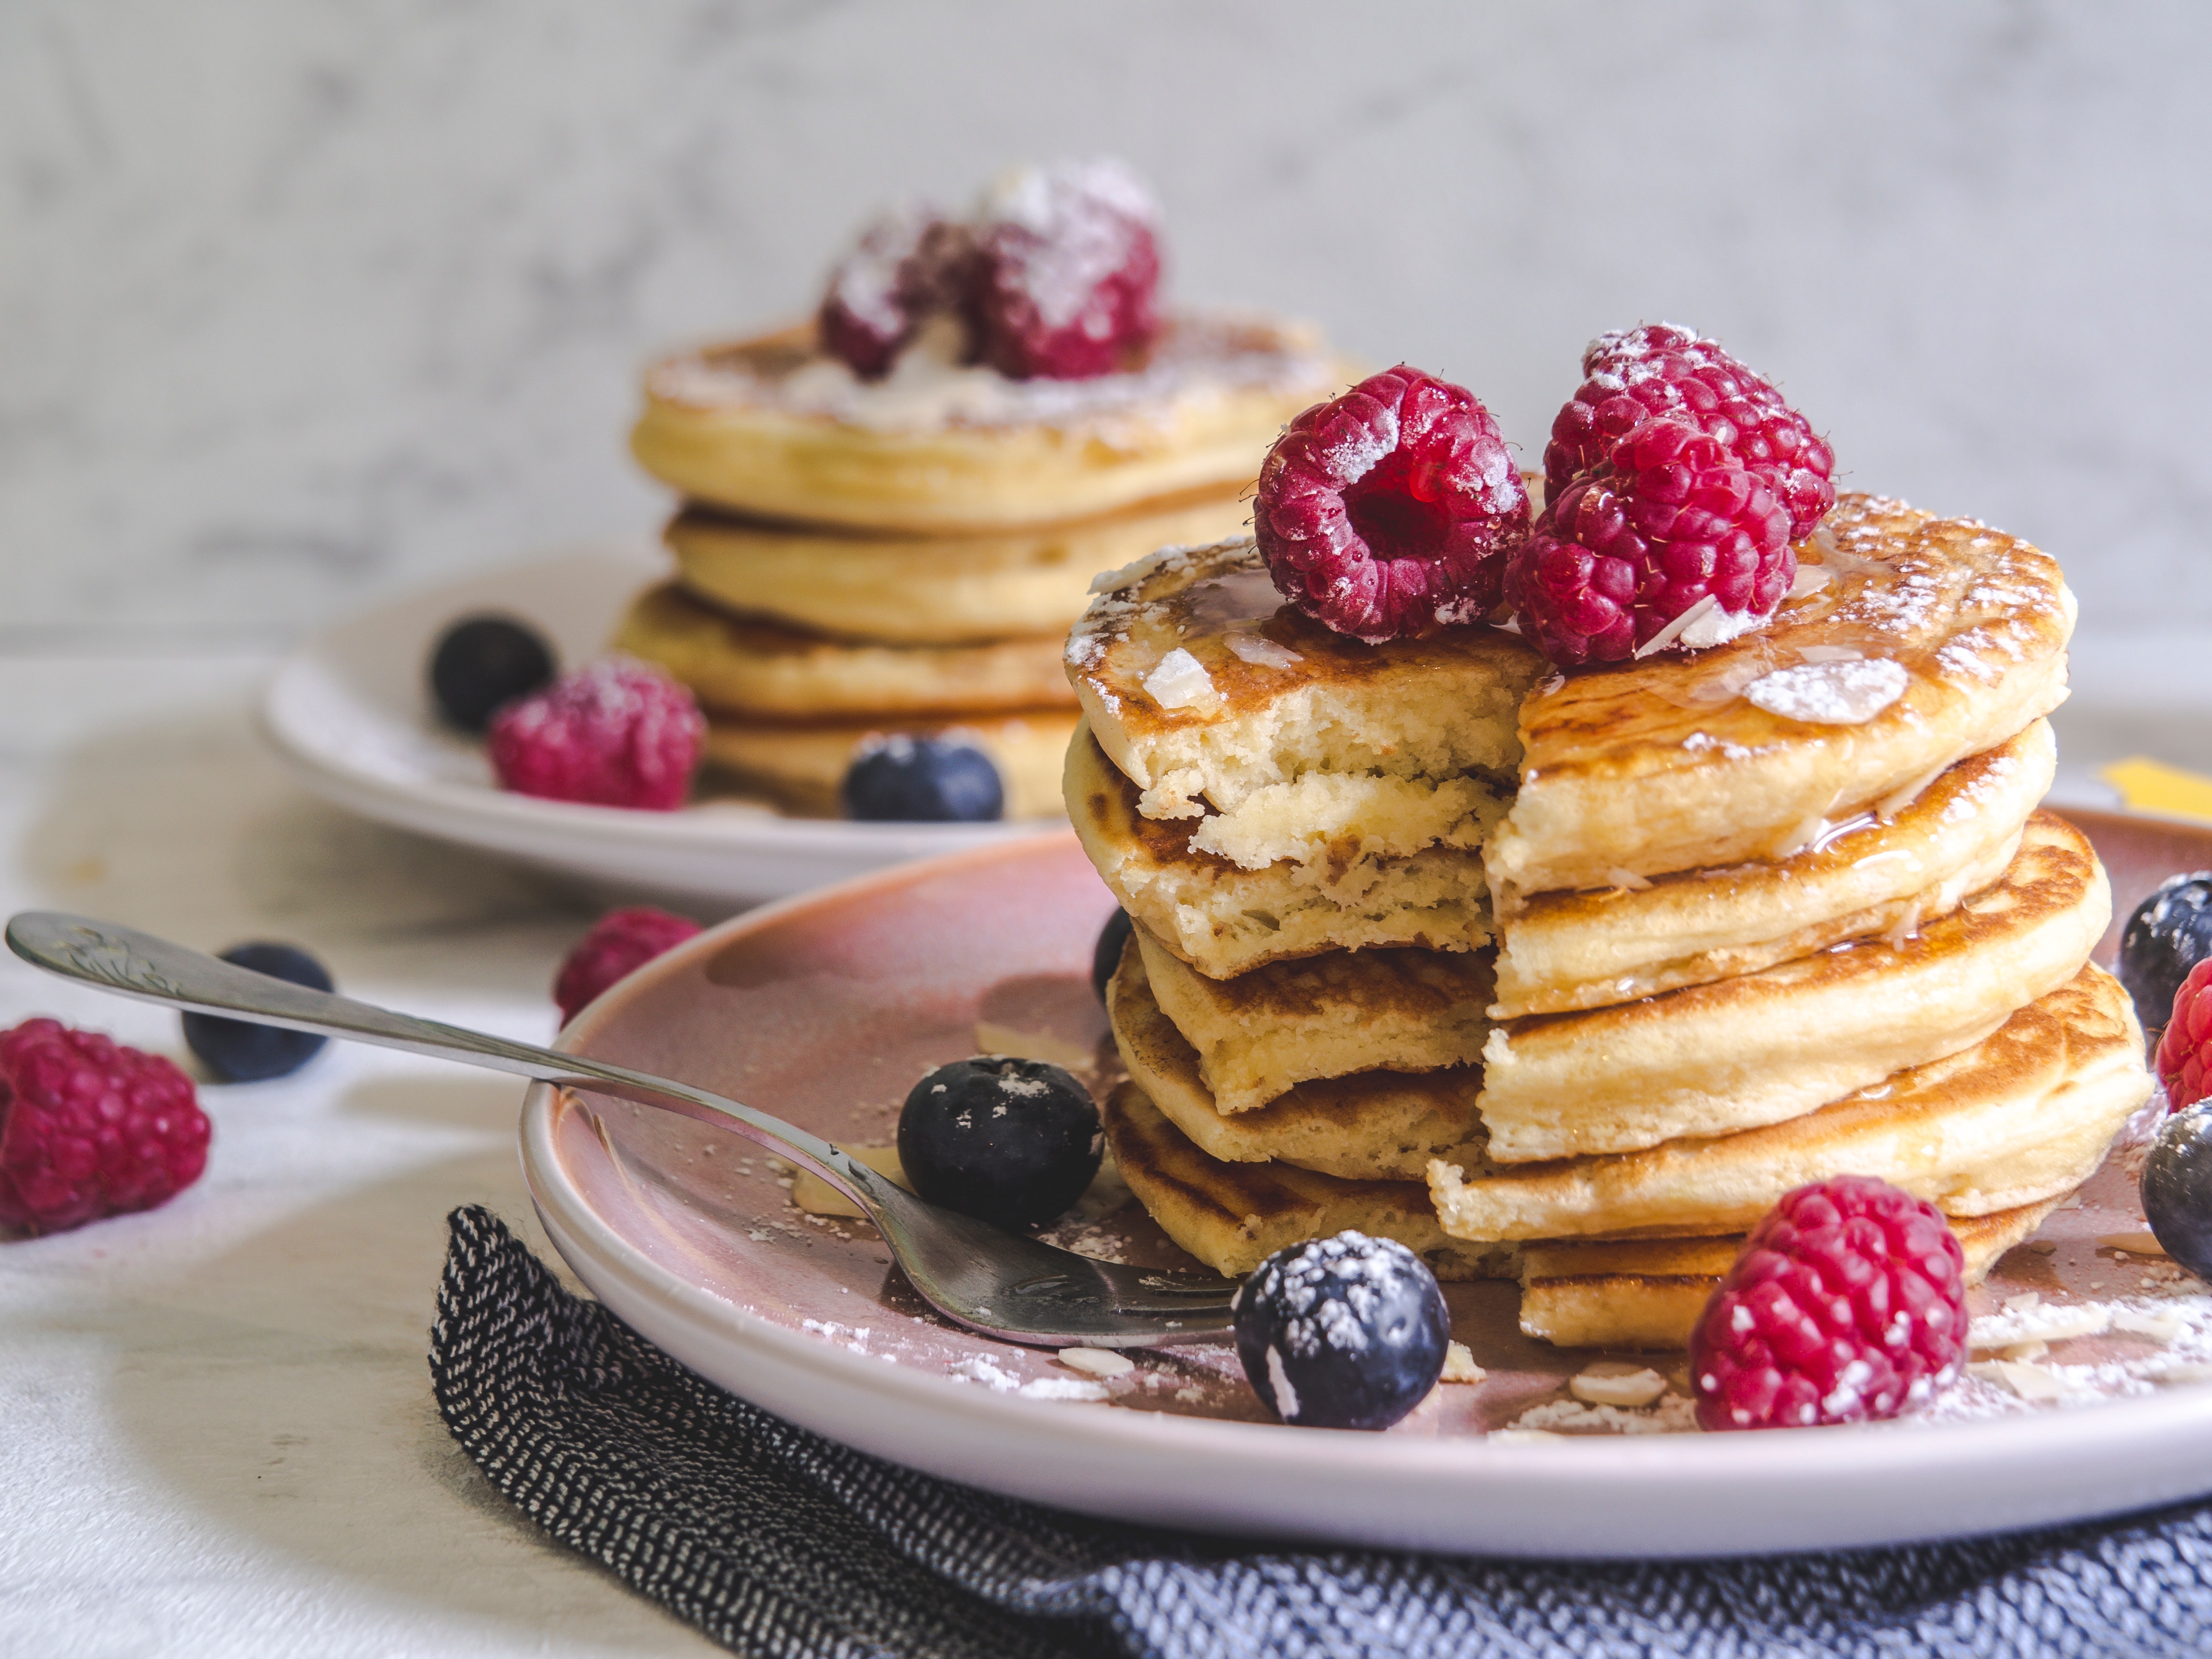 season berries and pancakes in a plate